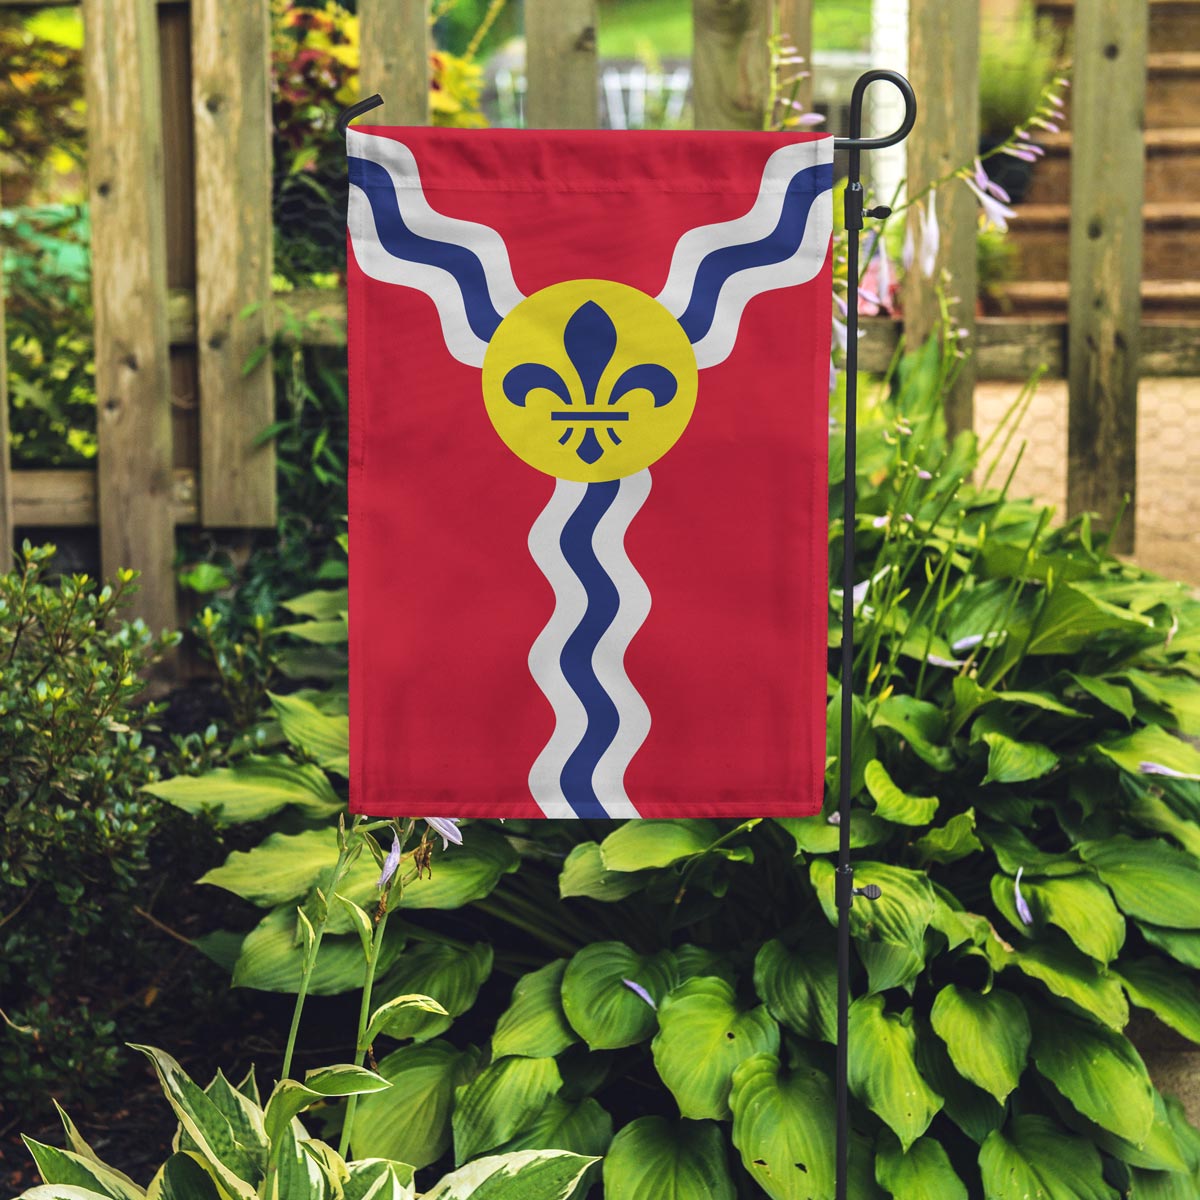 st louis flag posted in a garden